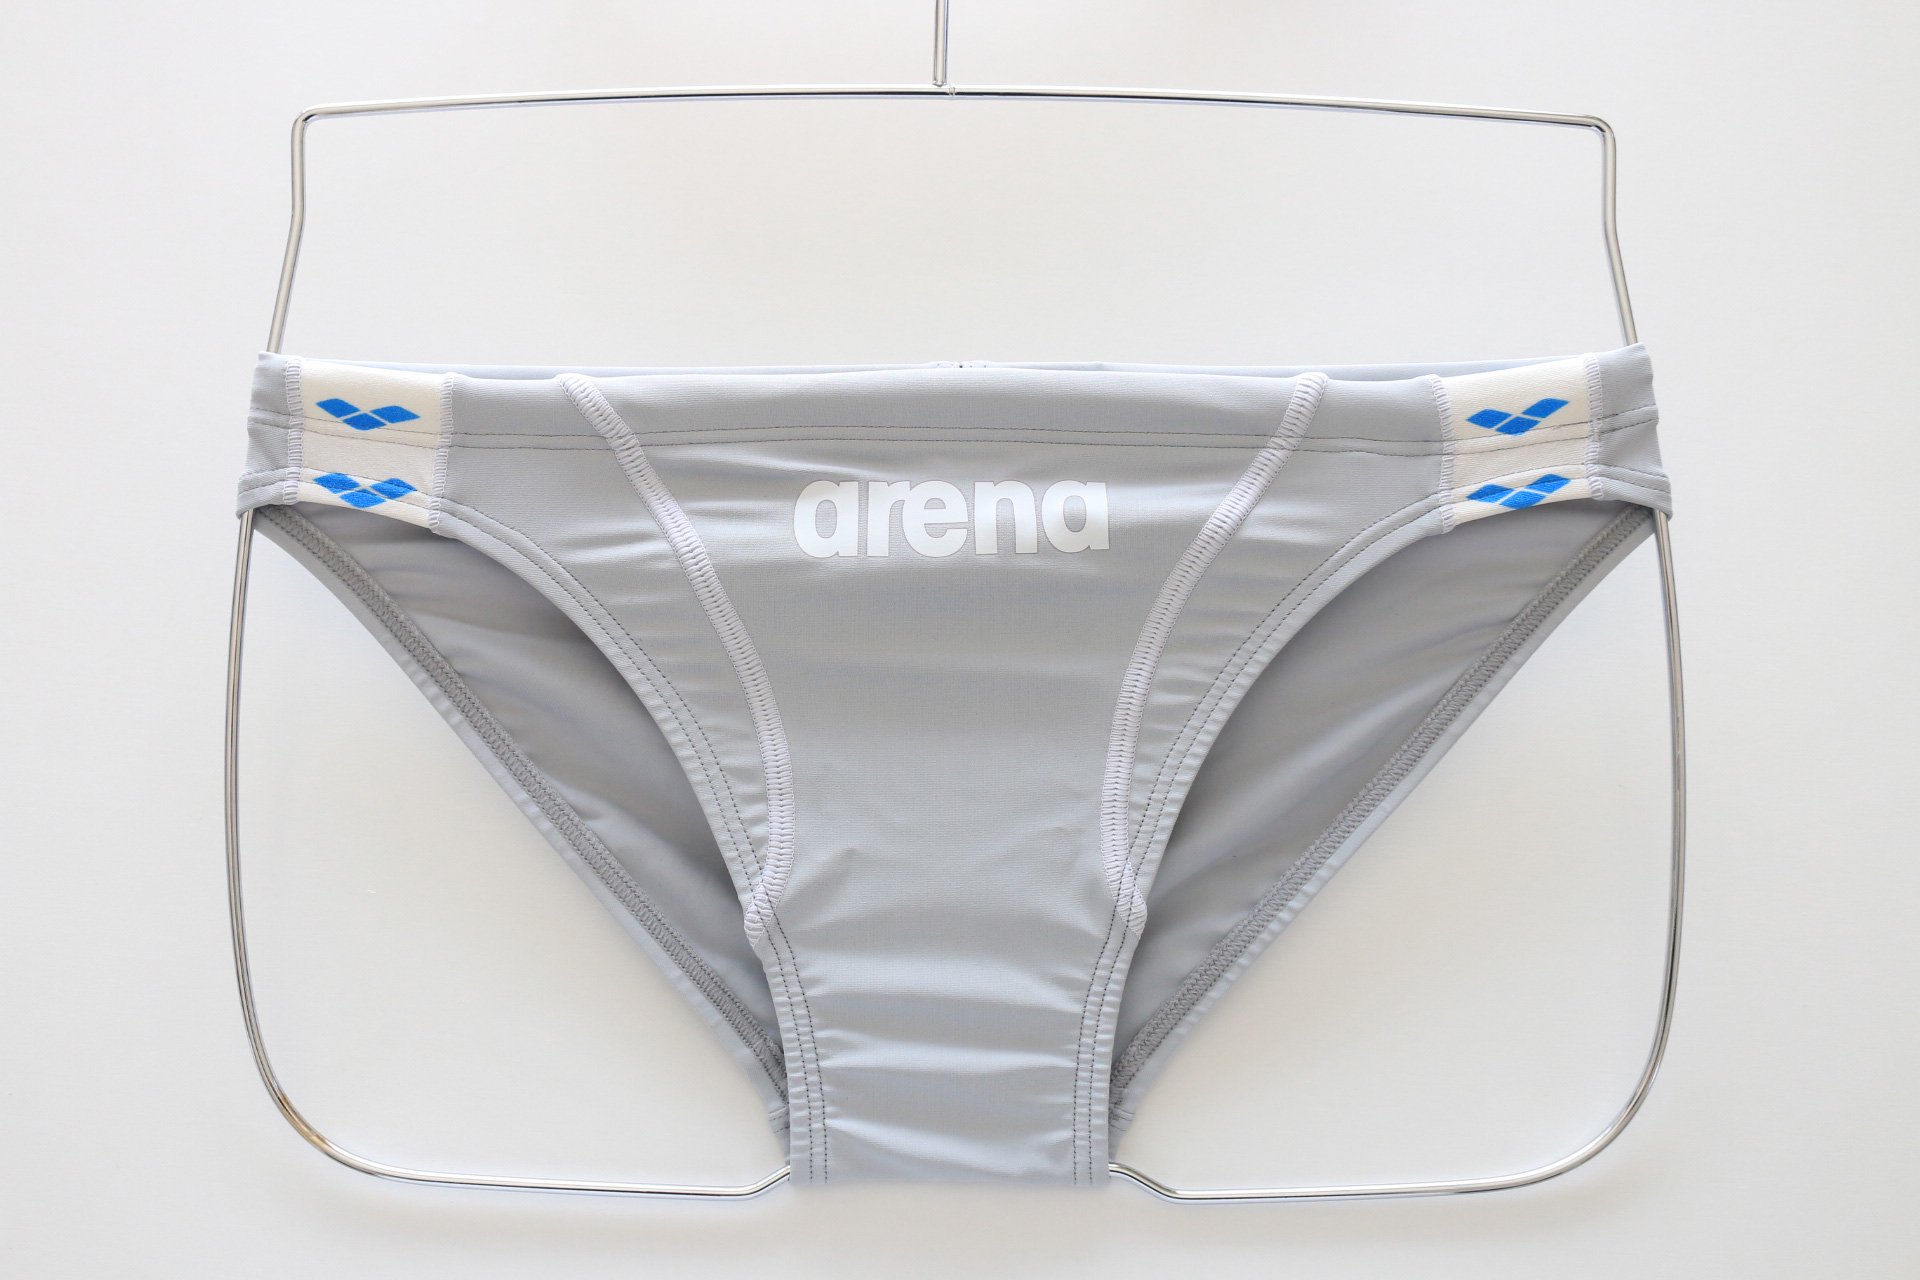 Arena Men's Competition Swimwear Racing Swimsuit nux-D Bikini Brief LGRY